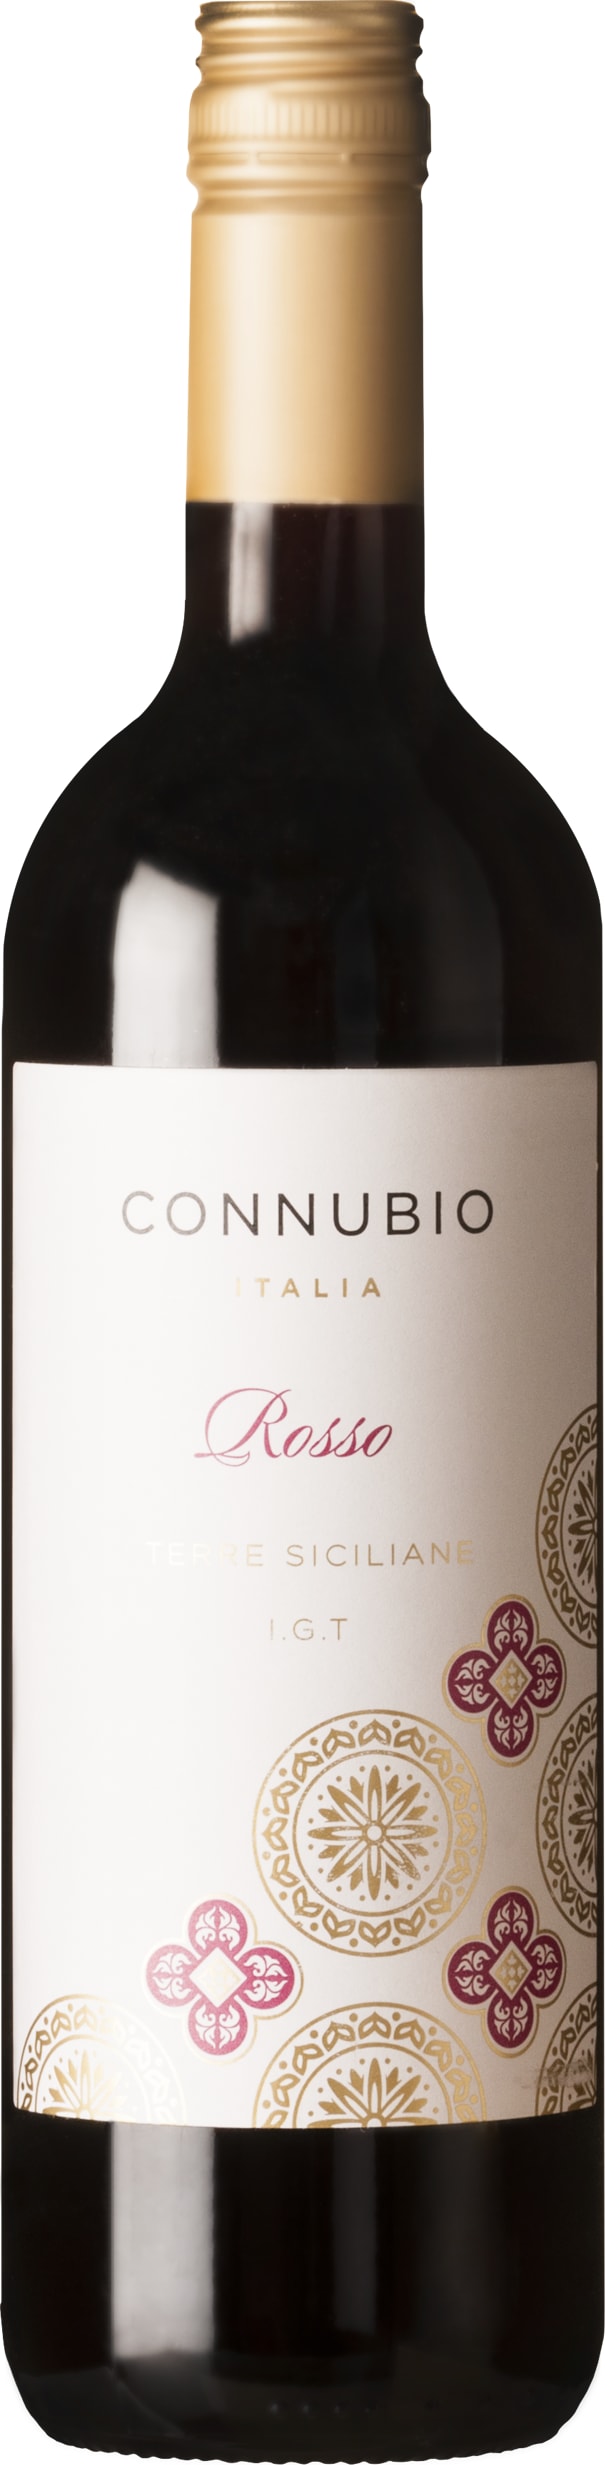 Connubio Rosso Magnum 2020 150cl - Buy Connubio Wines from GREAT WINES DIRECT wine shop